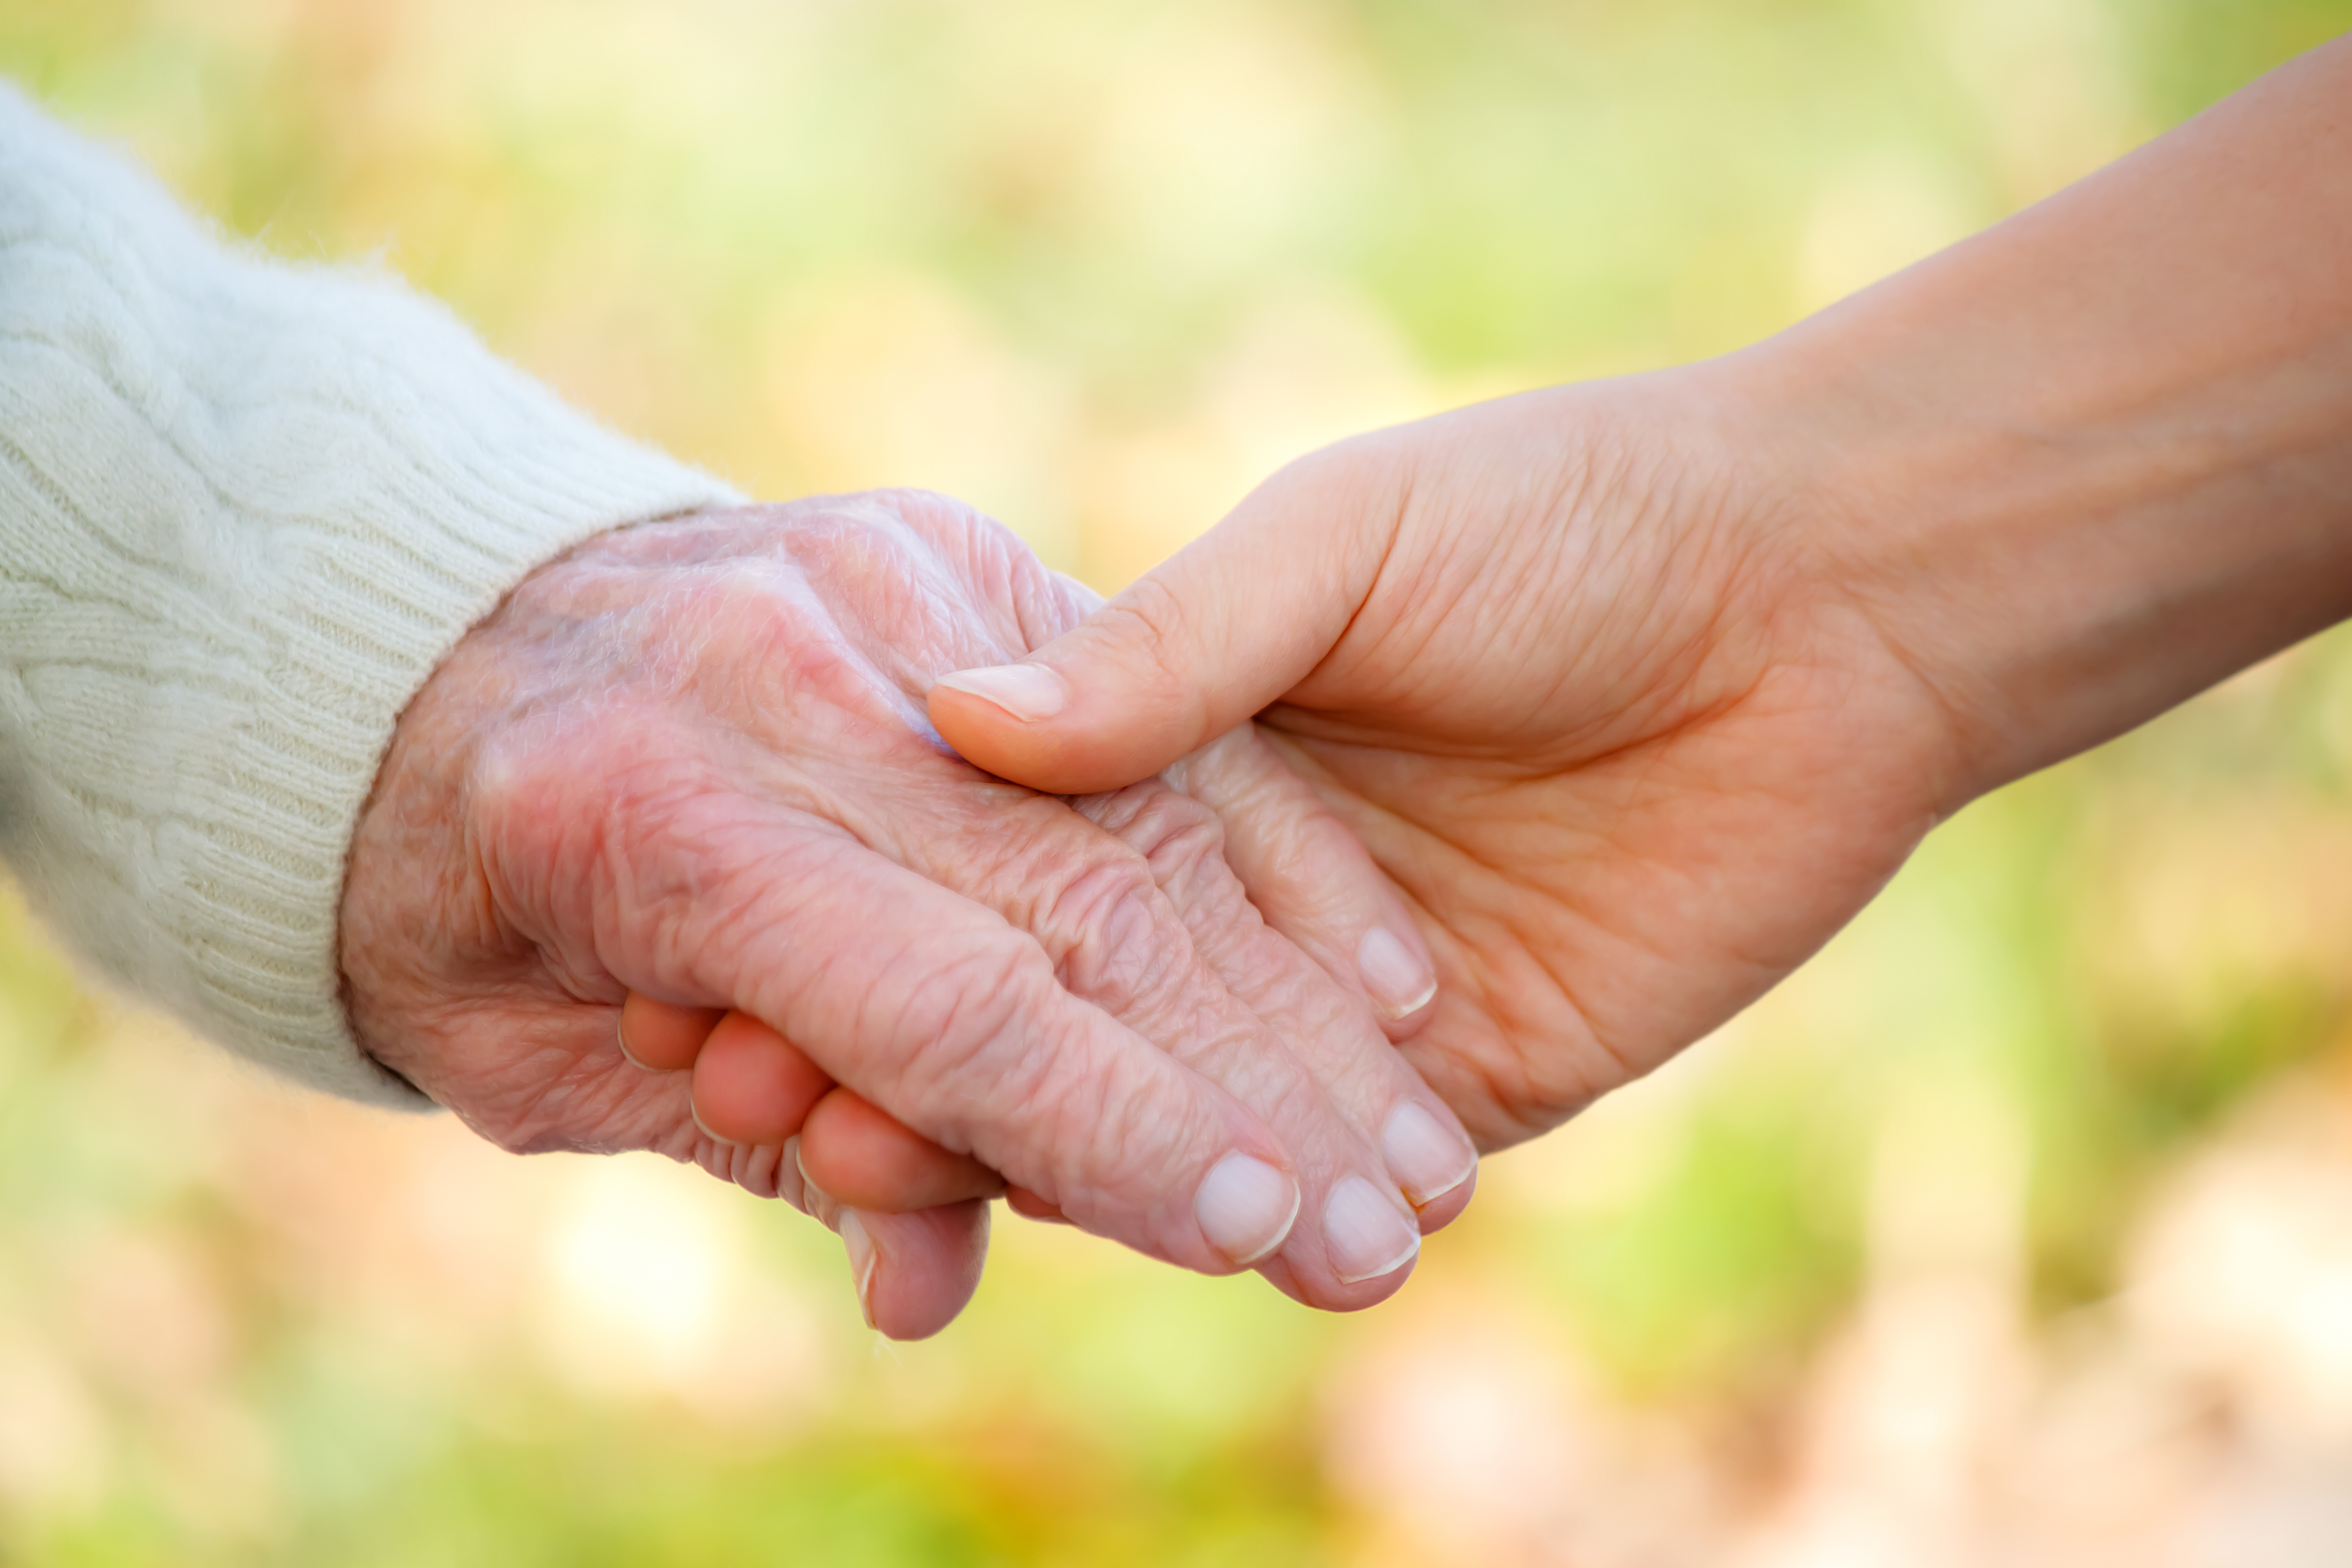 Senior and young holding hands outside | Source: Shutterstock